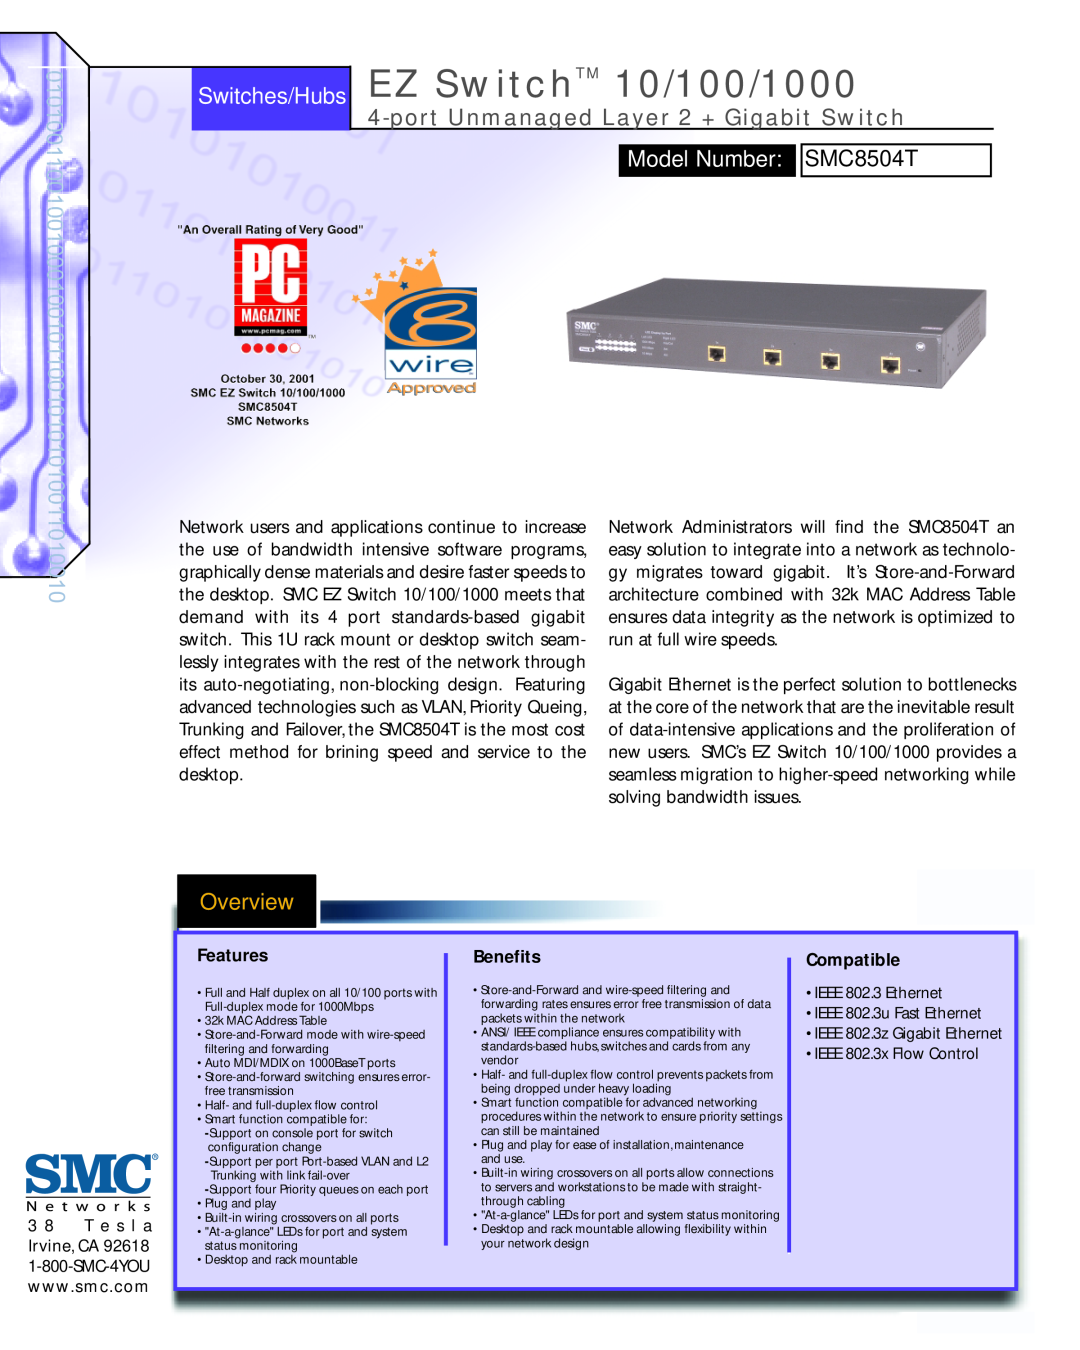 SMC Networks SMC8504T manual Switches/Hubs EZ SwitchTM 10/100/1000, port Unmanaged Layer 2 + Gigabit Switch, 1010010 